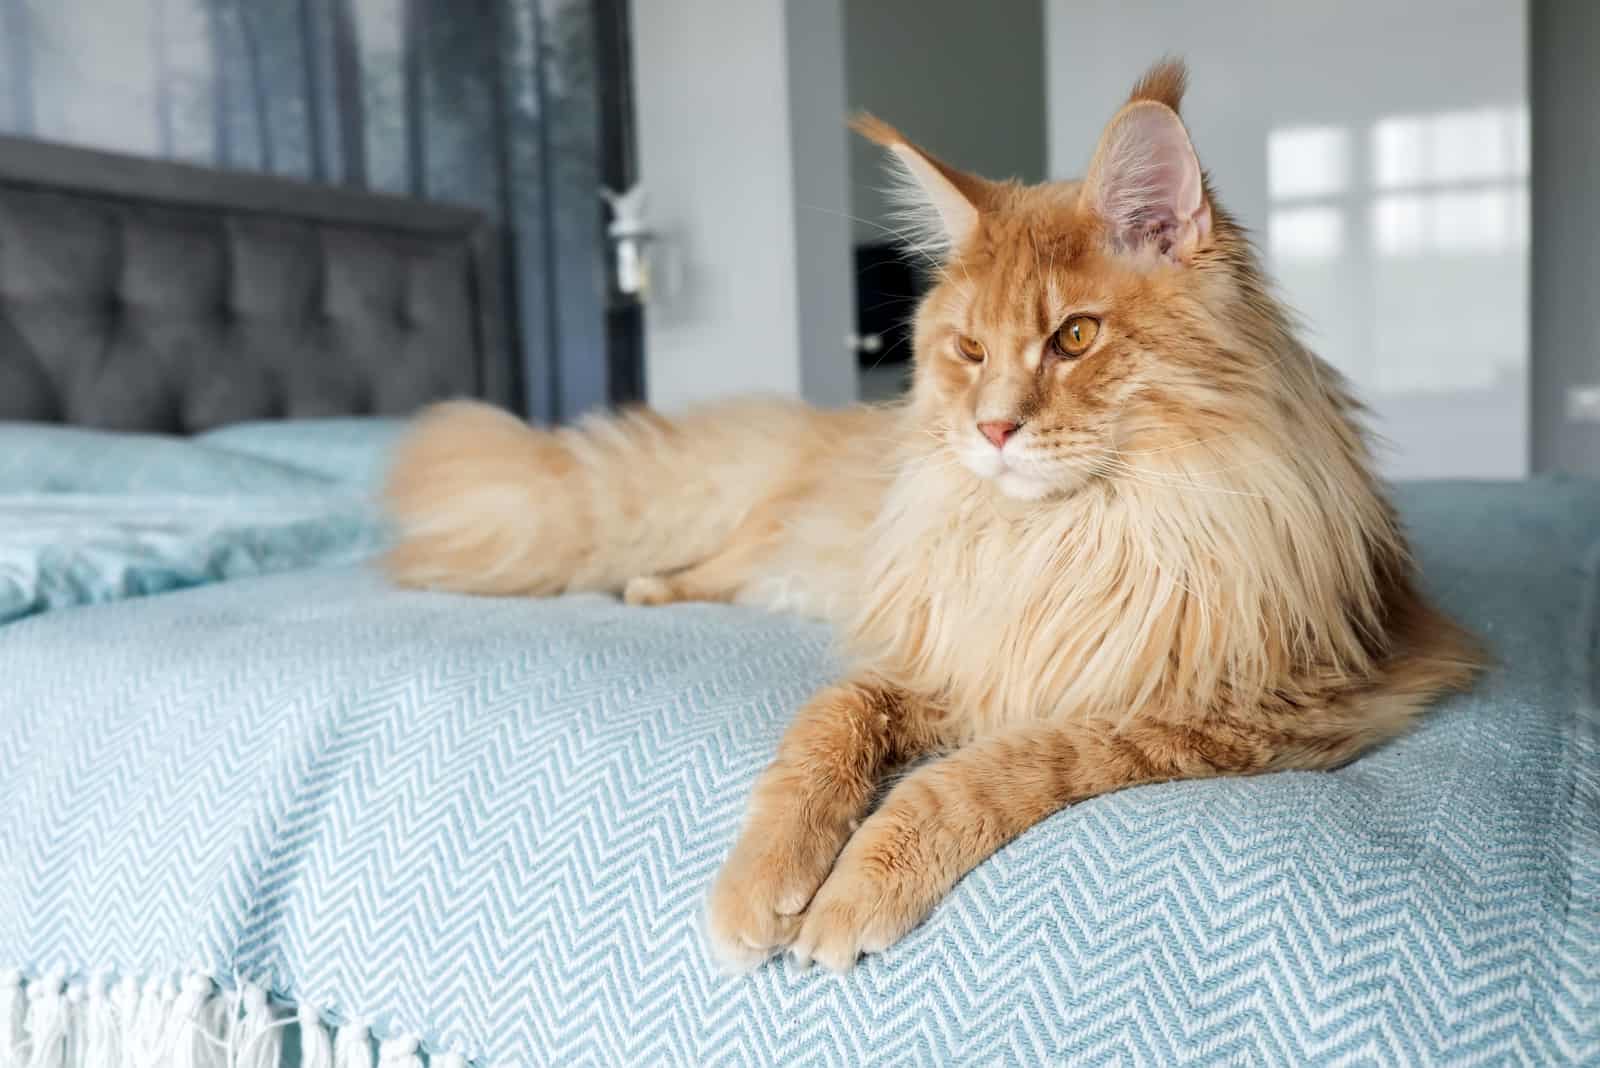 Long Haired Cat sitting on bed